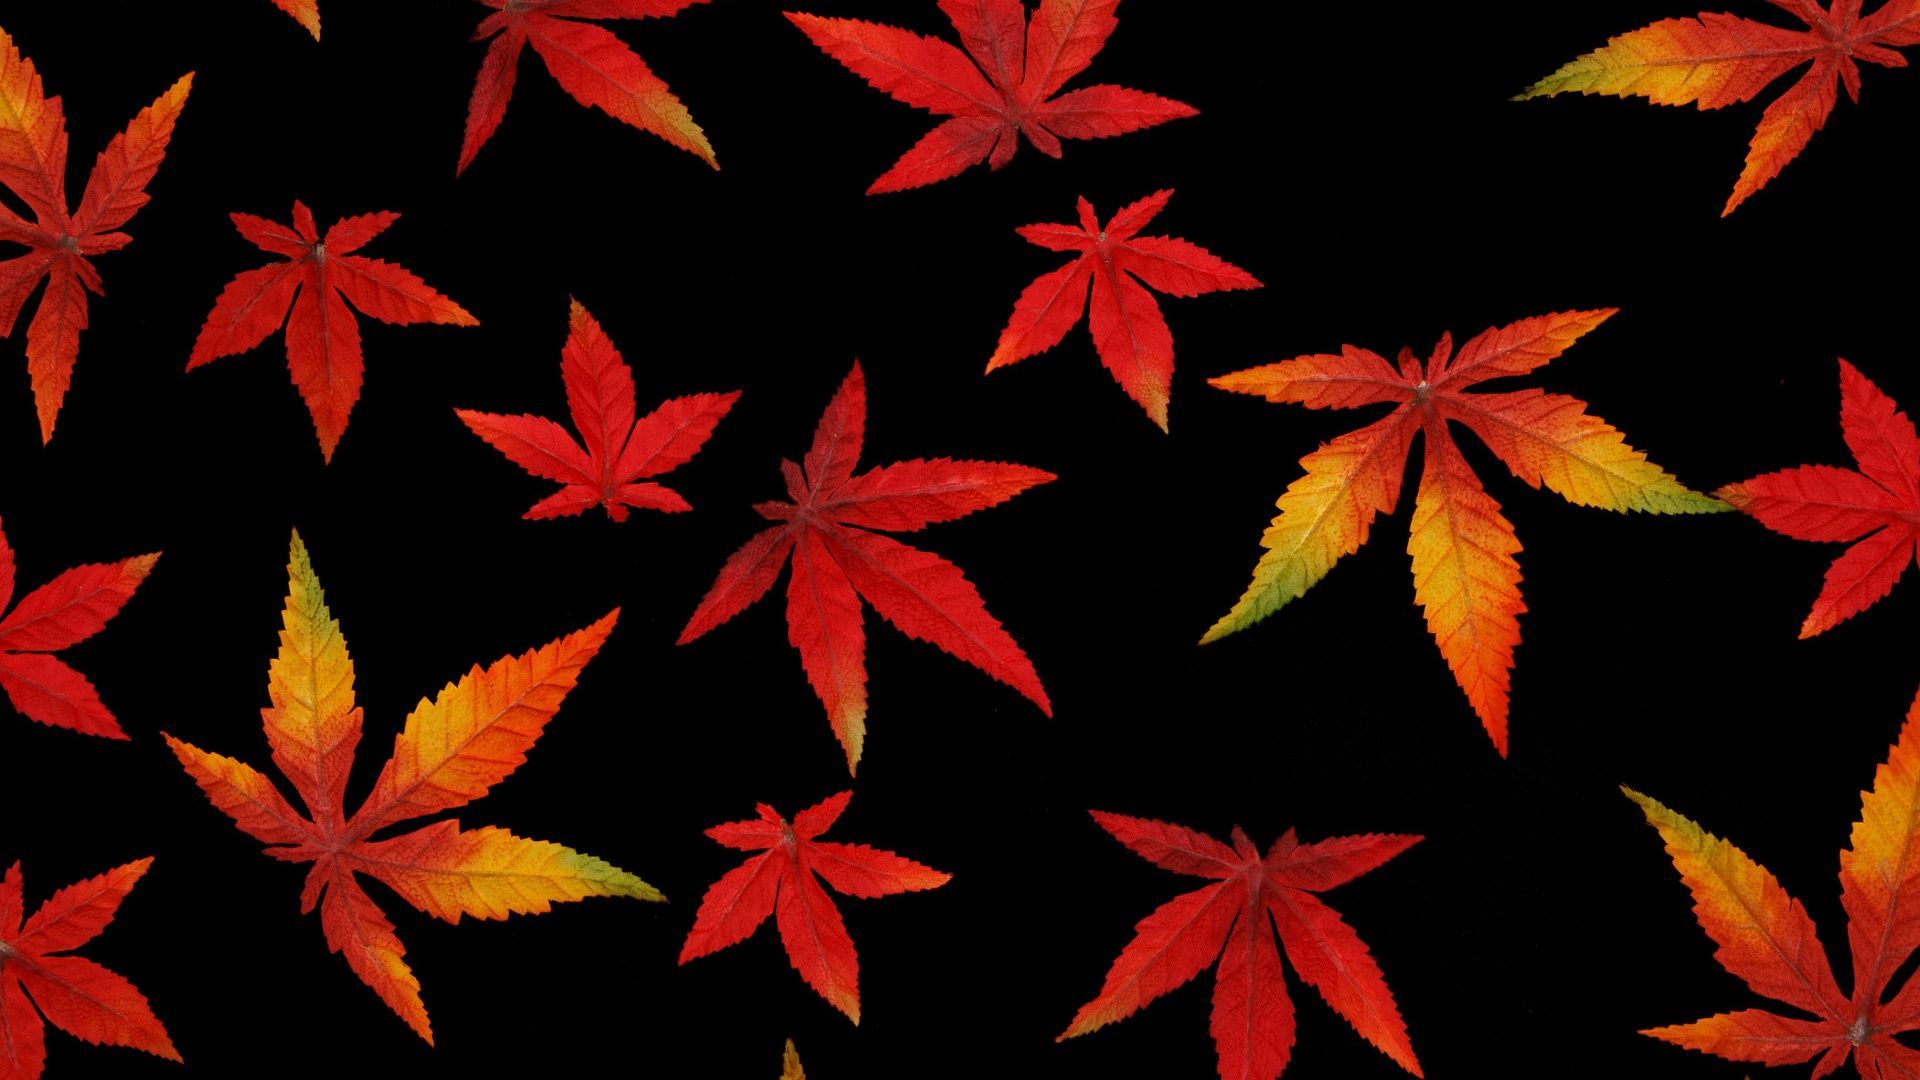 Abstract Autumn Leaf with Black Background Wallpaper. Black background wallpaper, Fall wallpaper, Red and black wallpaper